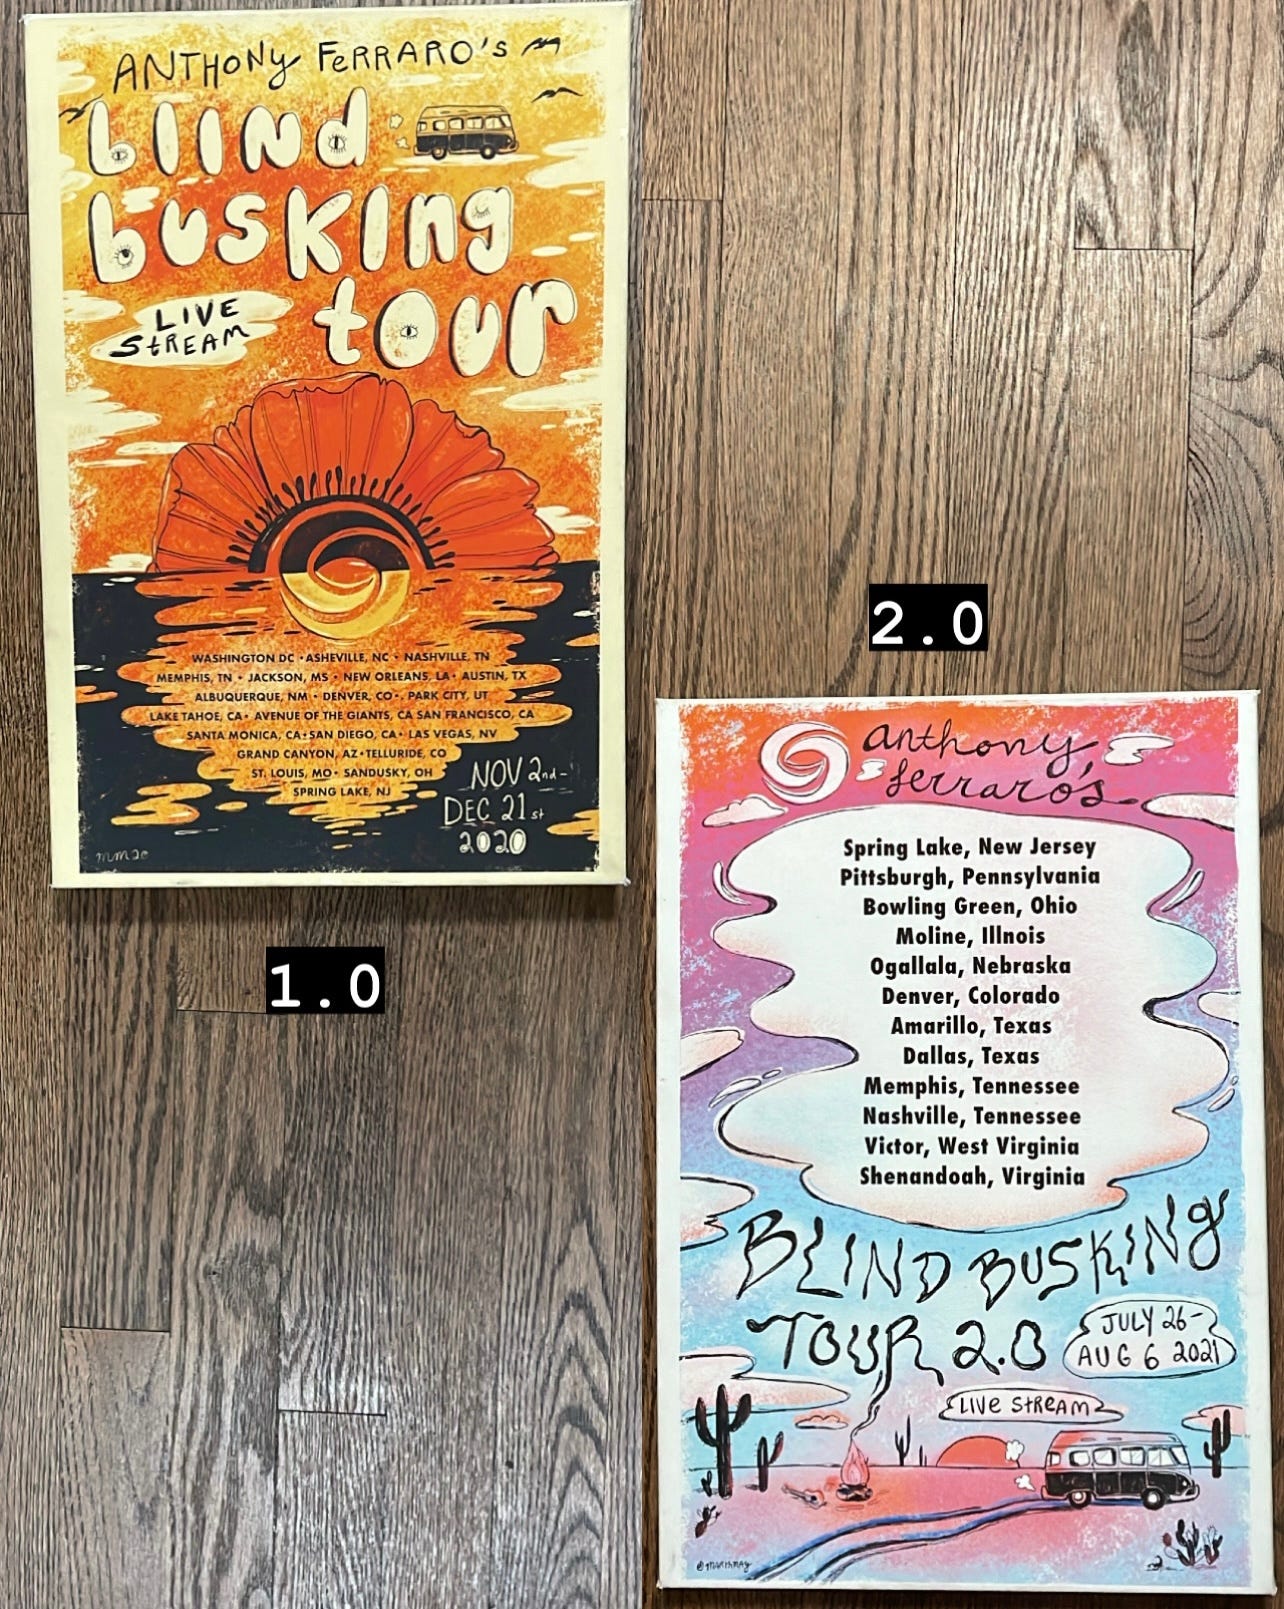 a picture of blind busing tour 1.0 and the poster for blind busing tour 2.0 side by side showing the different stops and dates